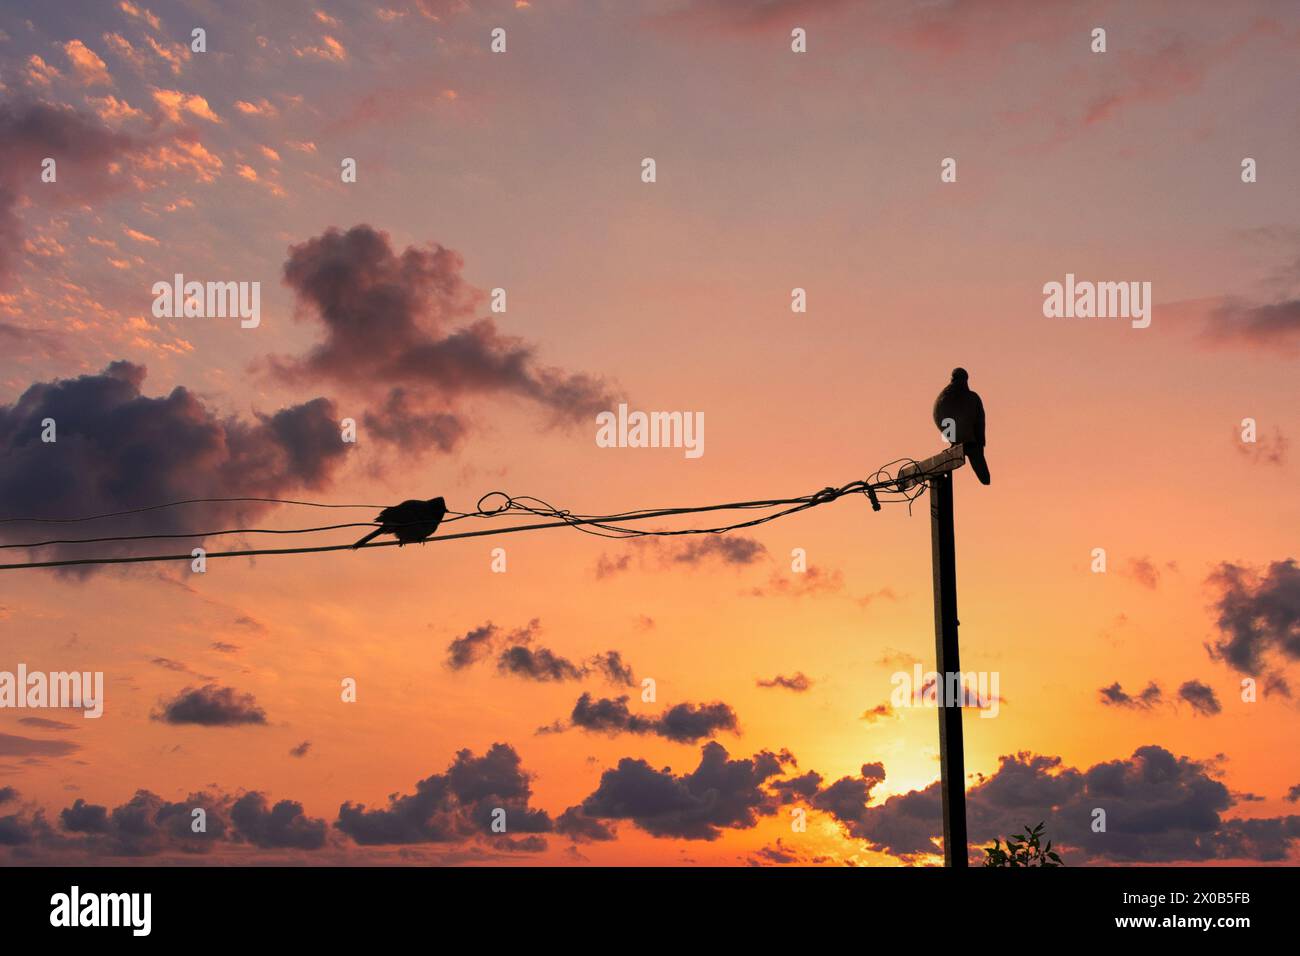 Silhouette click of birds sitting on wire Stock Photo